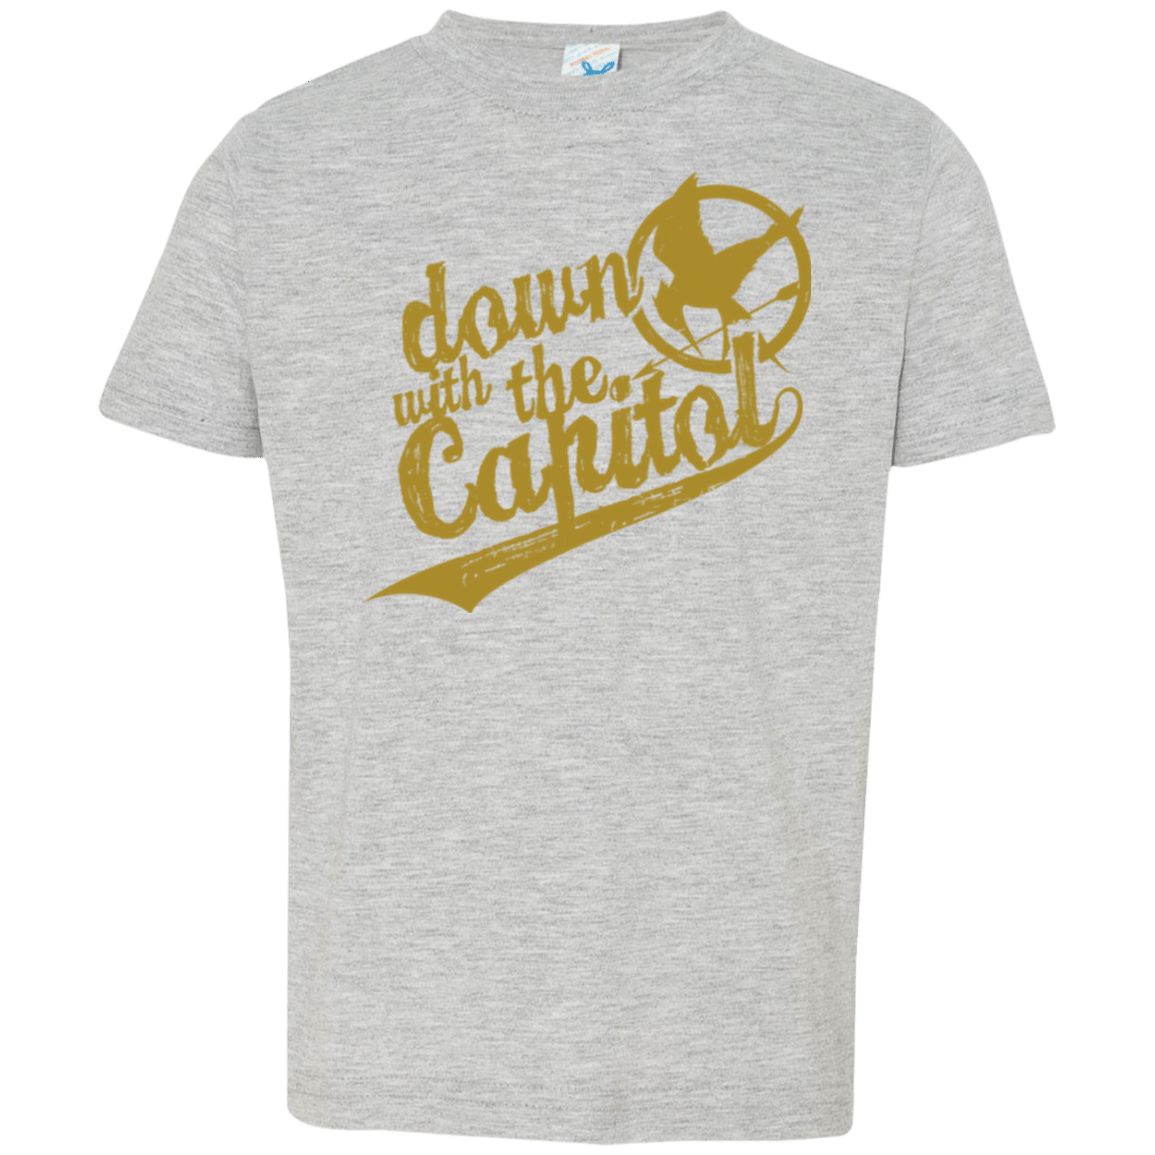 T-Shirts Heather / 2T Down with the Capitol Toddler Premium T-Shirt